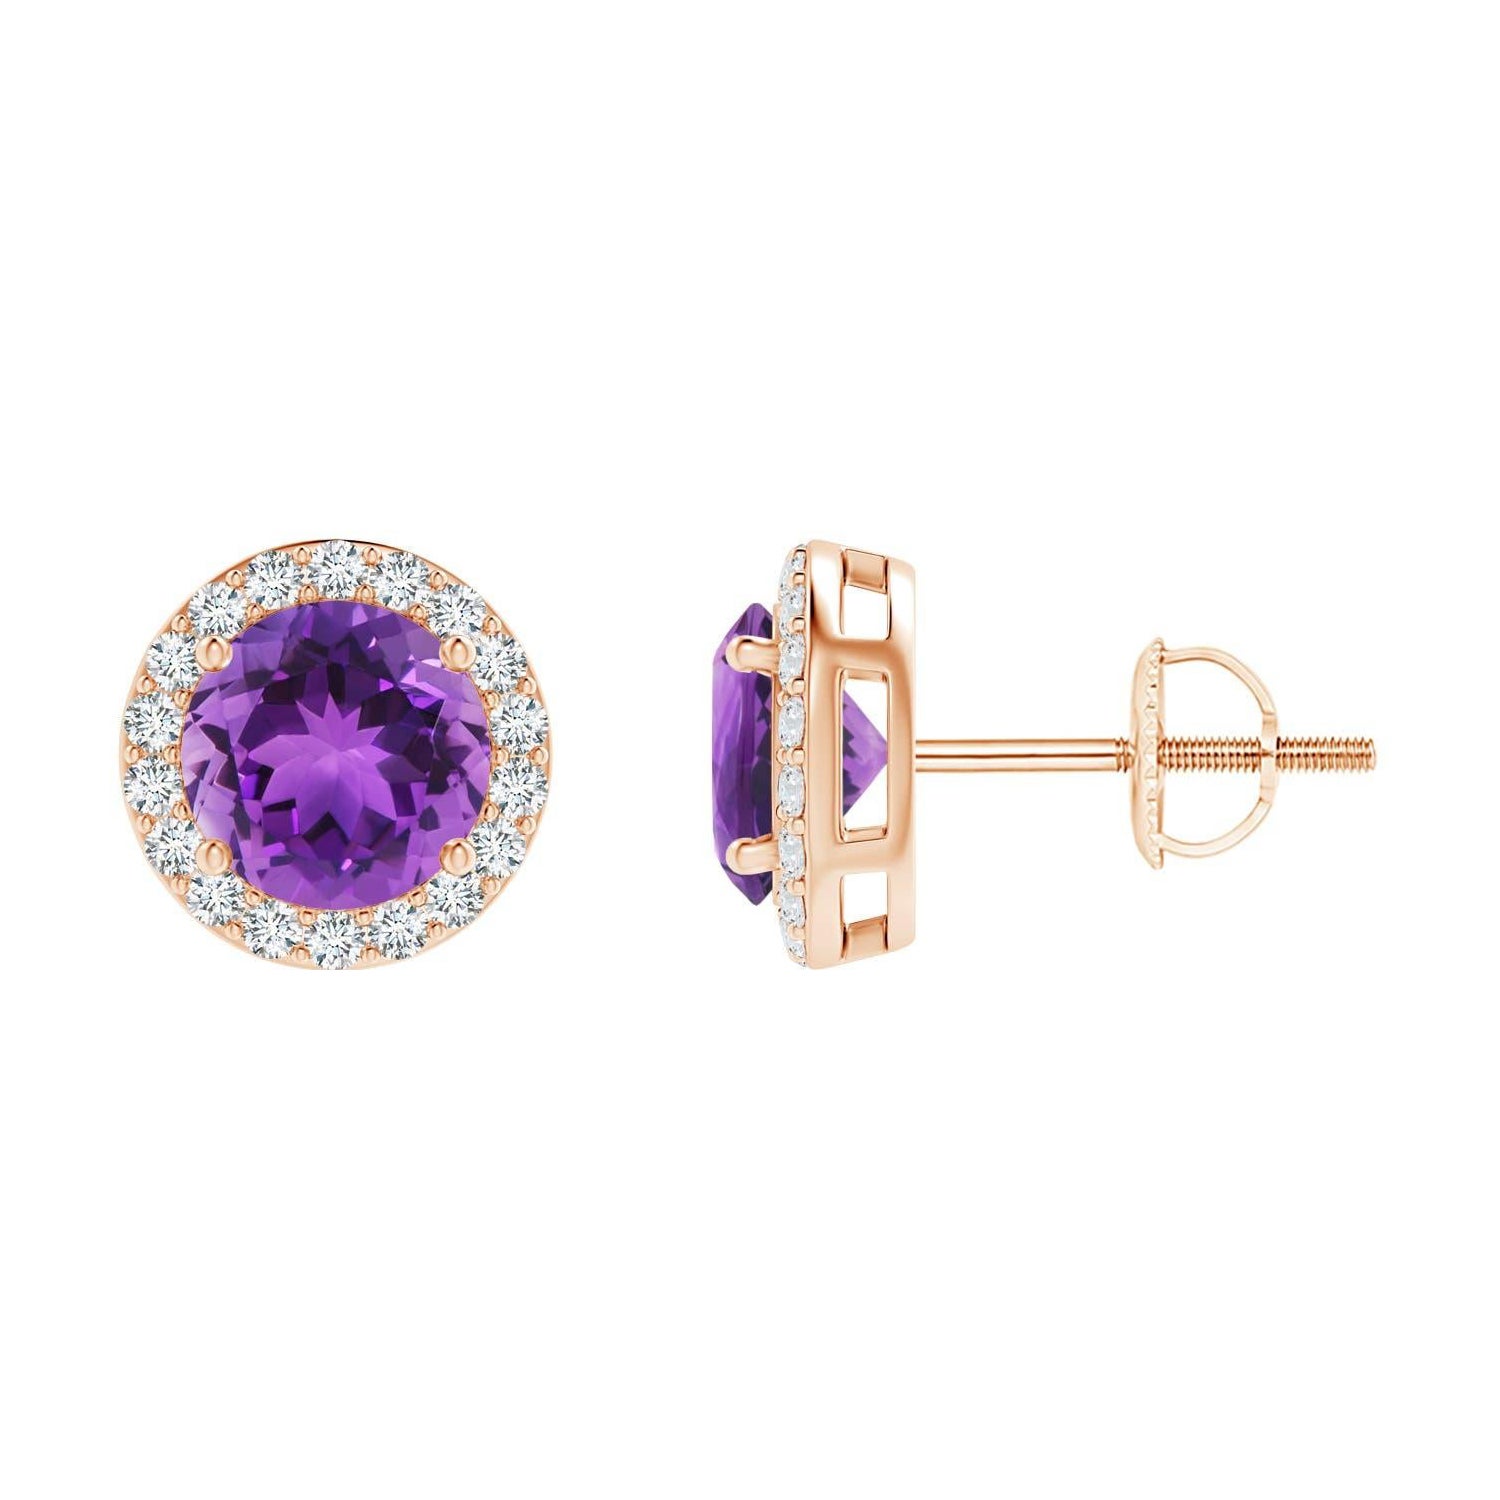 Natural Vintage Round 1.6ct Amethyst Halo Stud Earrings in 14K Rose Gold